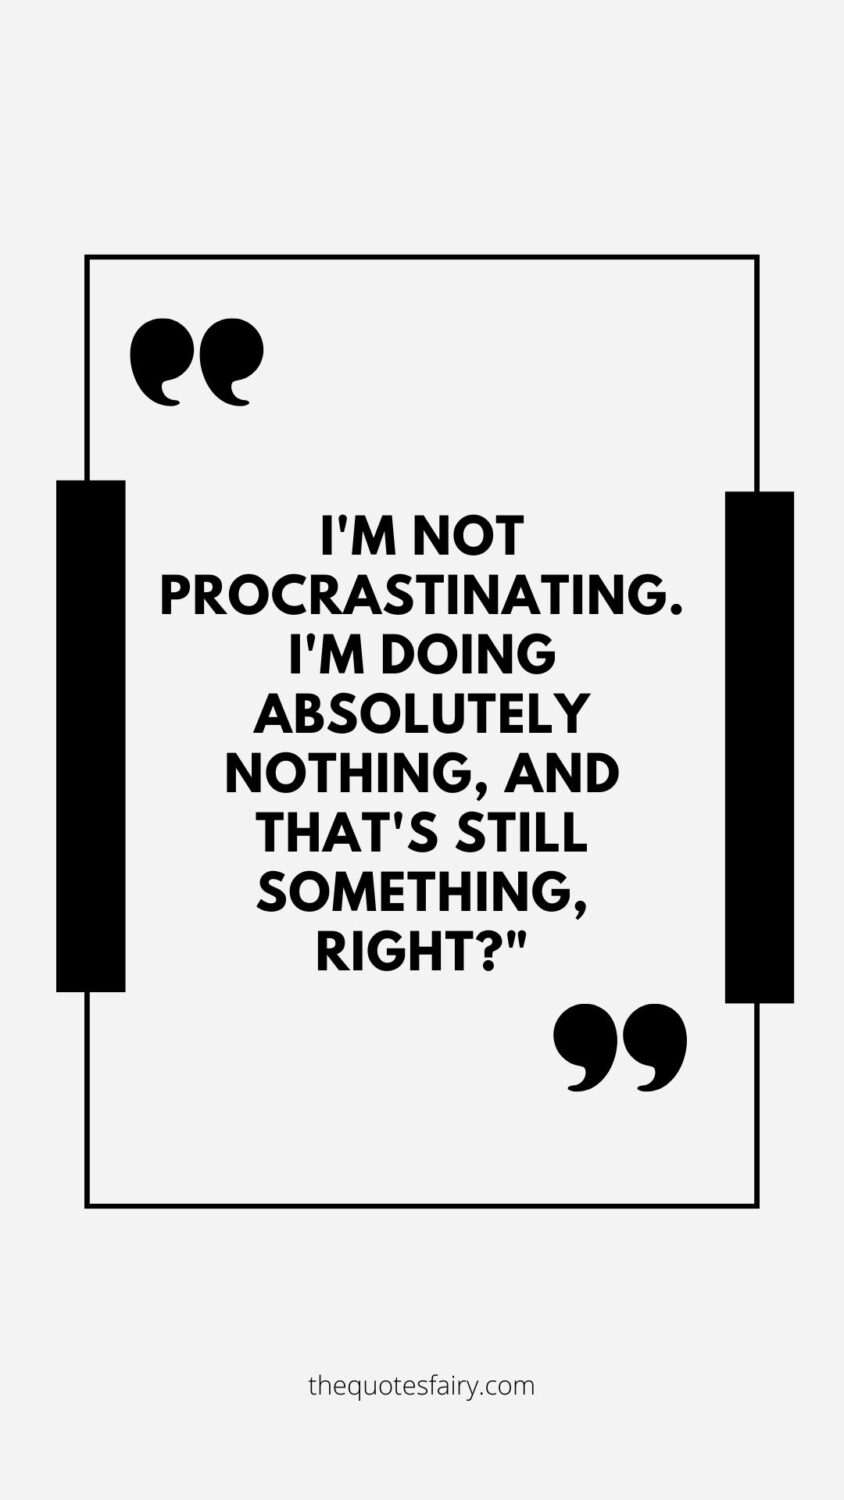 Procrastinating is something we all do! And let's face it, we never feel good about it, but let's make this time better by spending it together sharing the best time wasting quotes. I'm sure they will resonate with you!